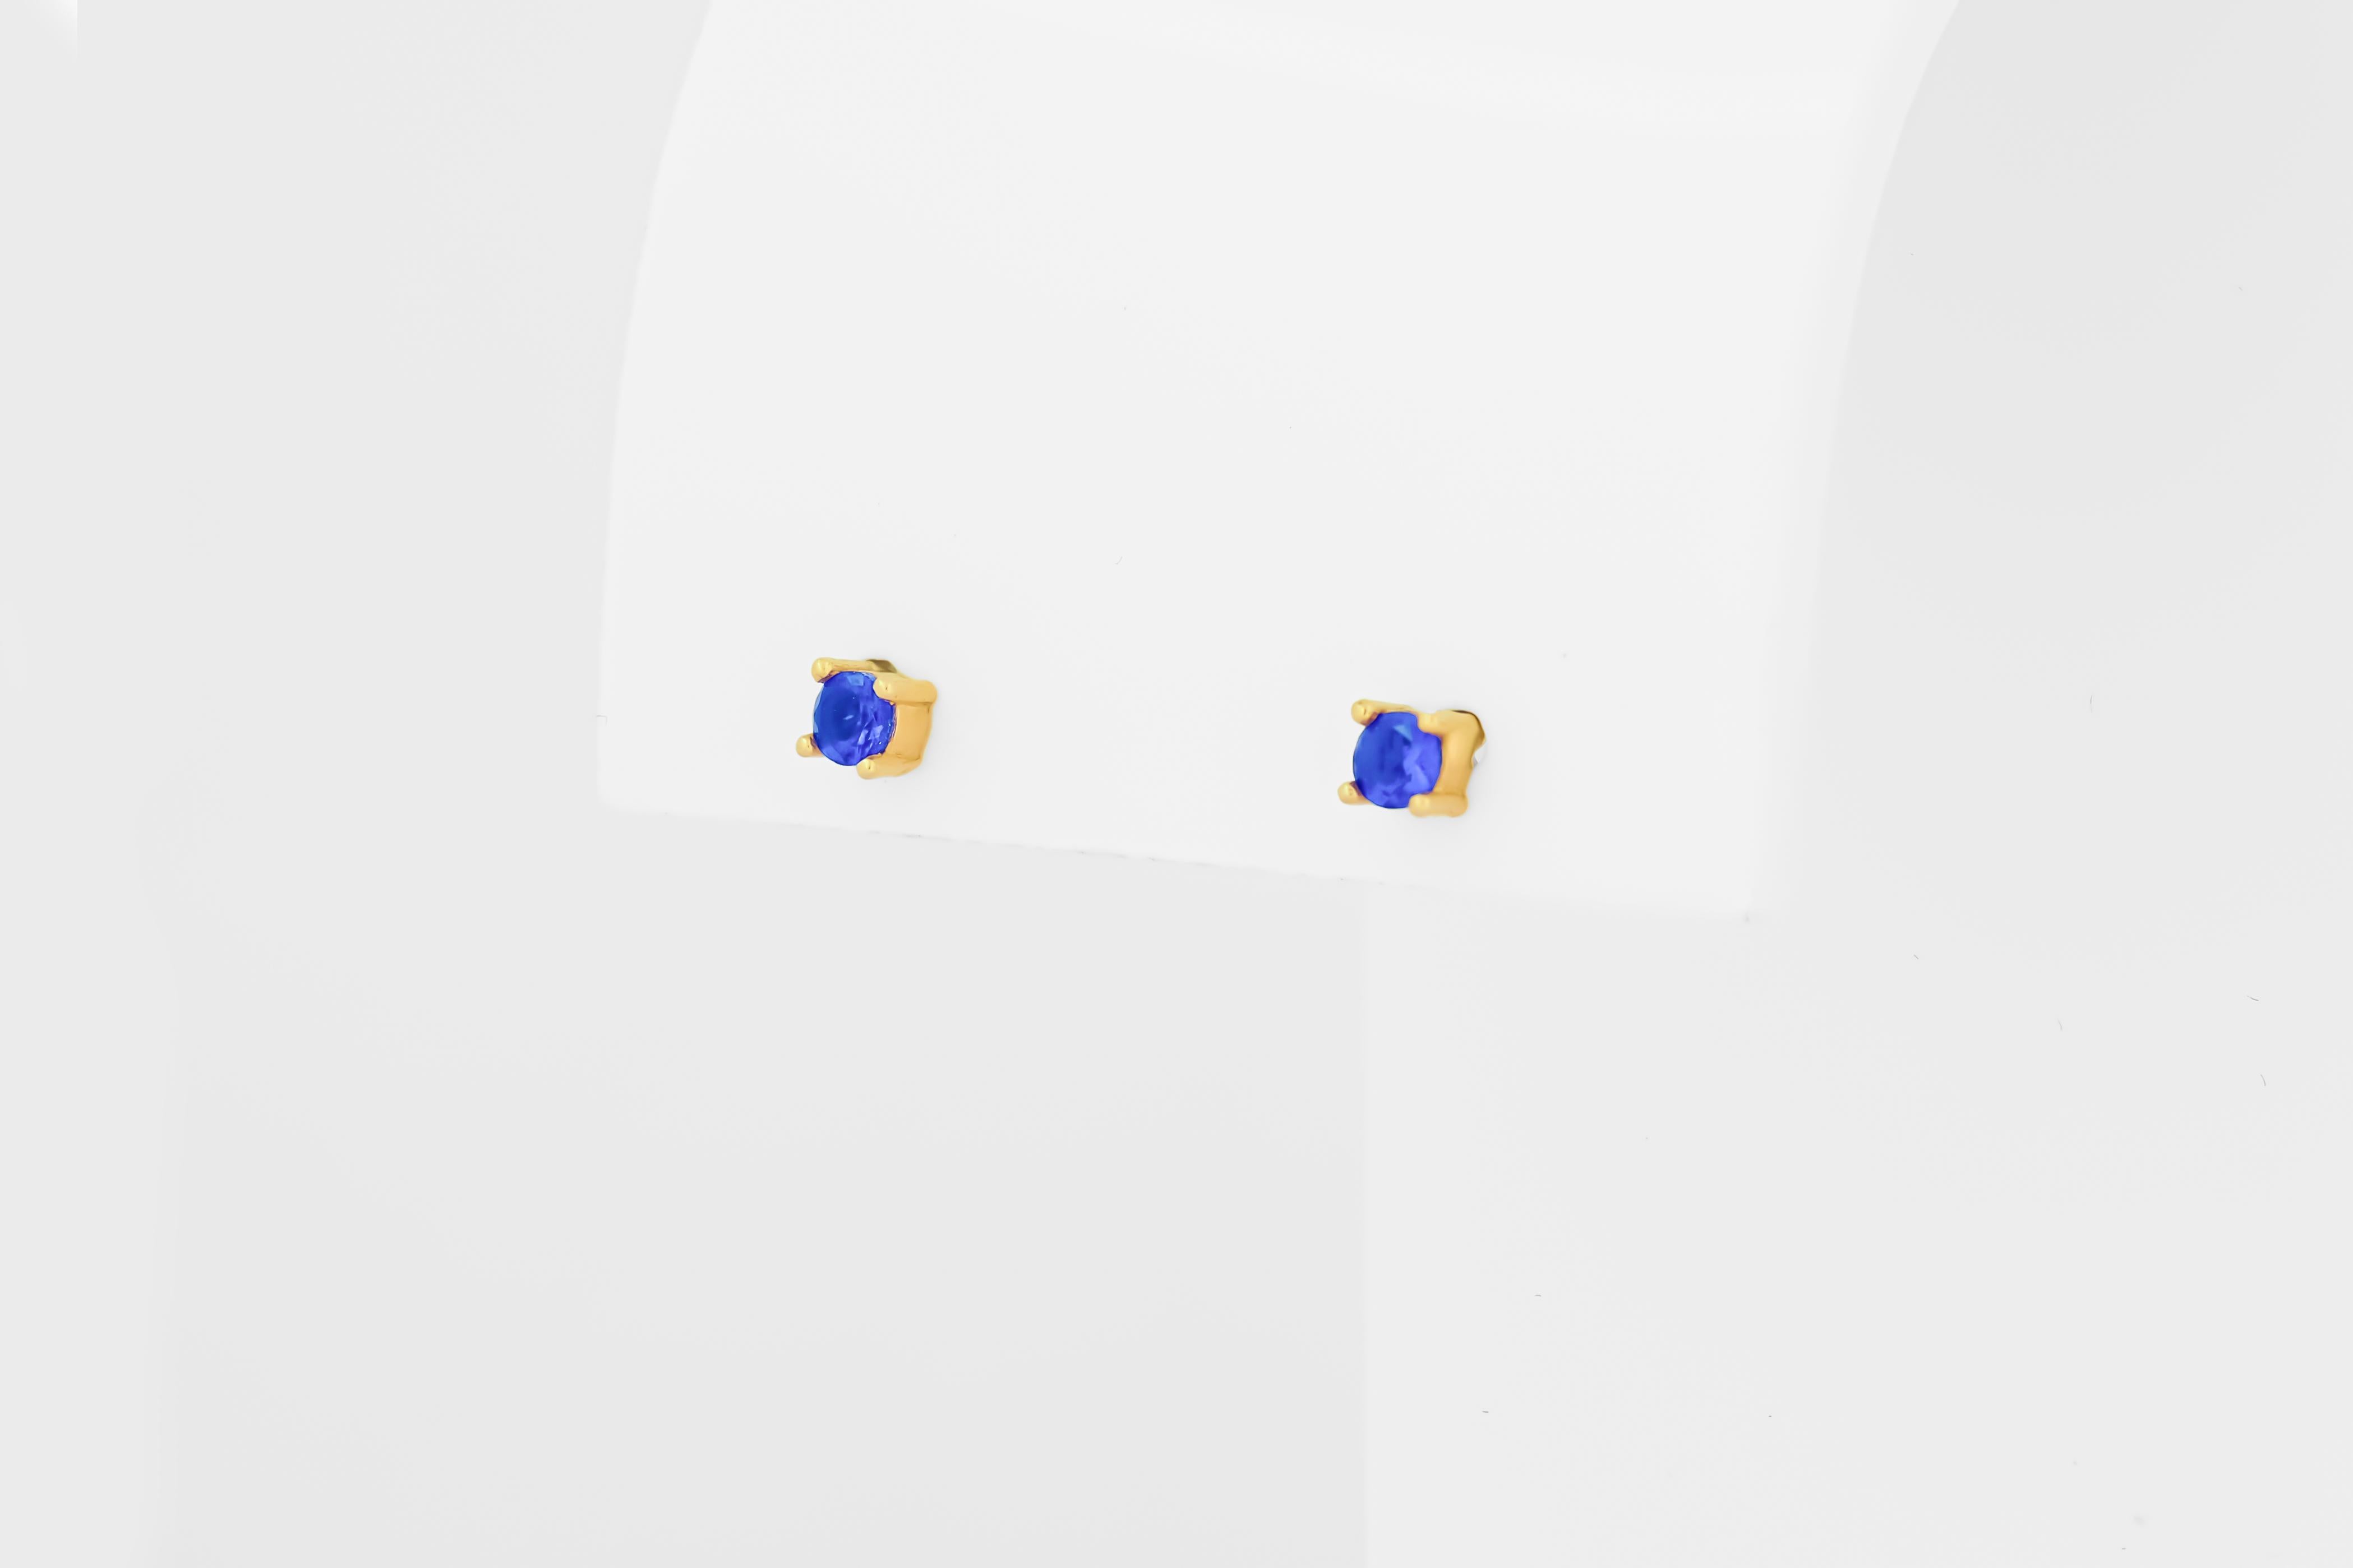 14 ct Gold Lab Sapphire Stud Earrings.  
3 mm sapphire earrings. Blue gemstone earrings. Small delicate gold earrings studs. Four prong studs. Minimalist sapphire earrings.

Metal: 14k solid gold
Weigt: 1.5 gr.
Earrings goes with gold